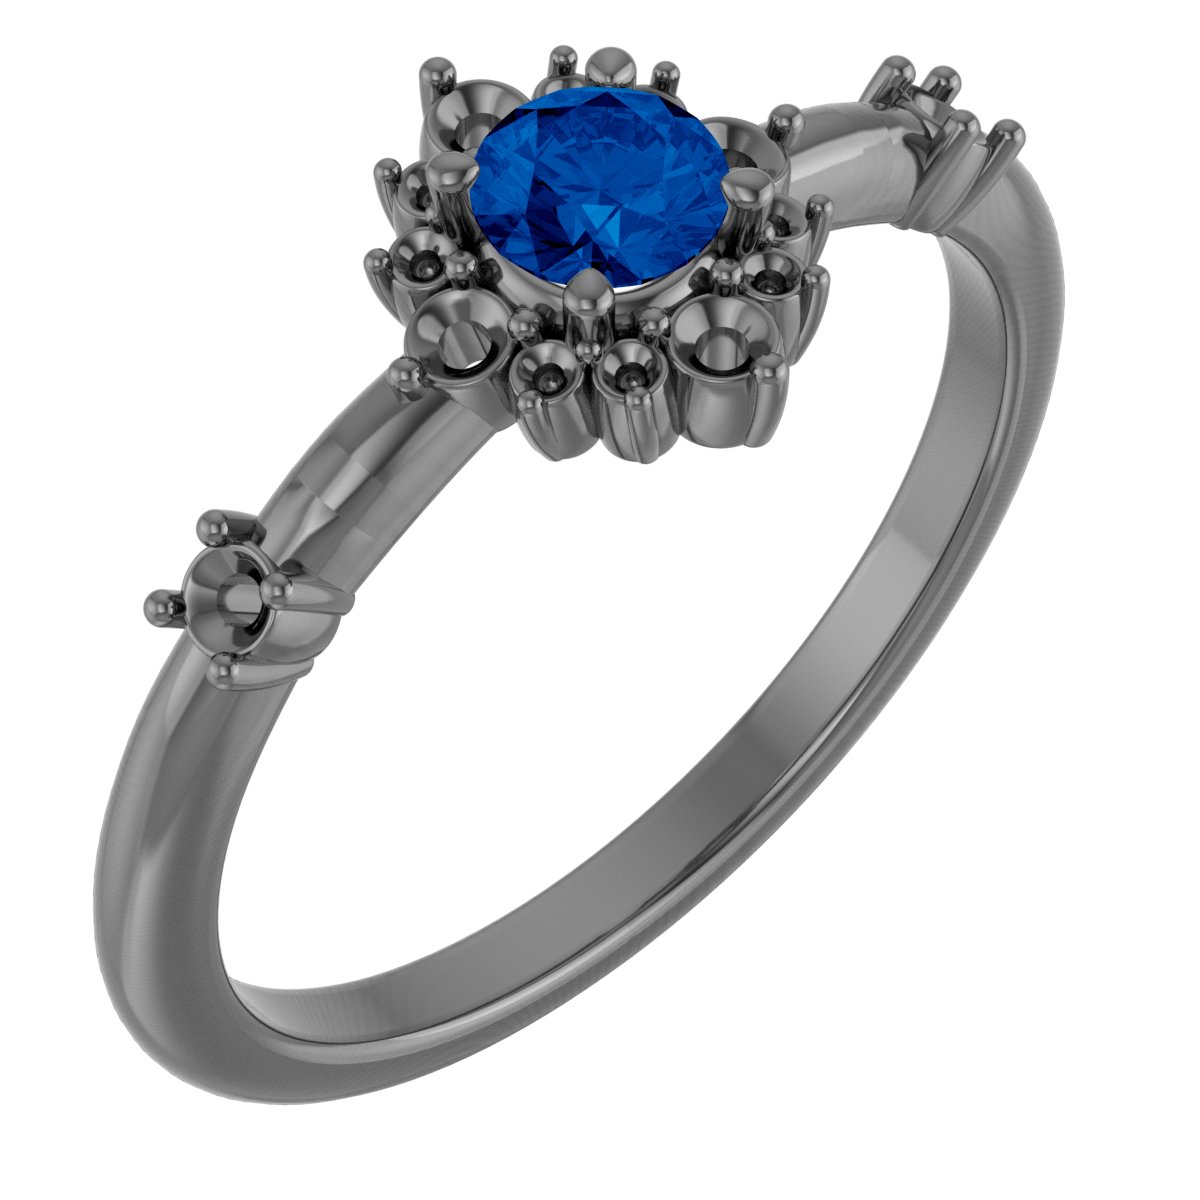 14K Rose Chatham Created Blue Sapphire and .167 CTW Diamond Ring Ref. 15641445